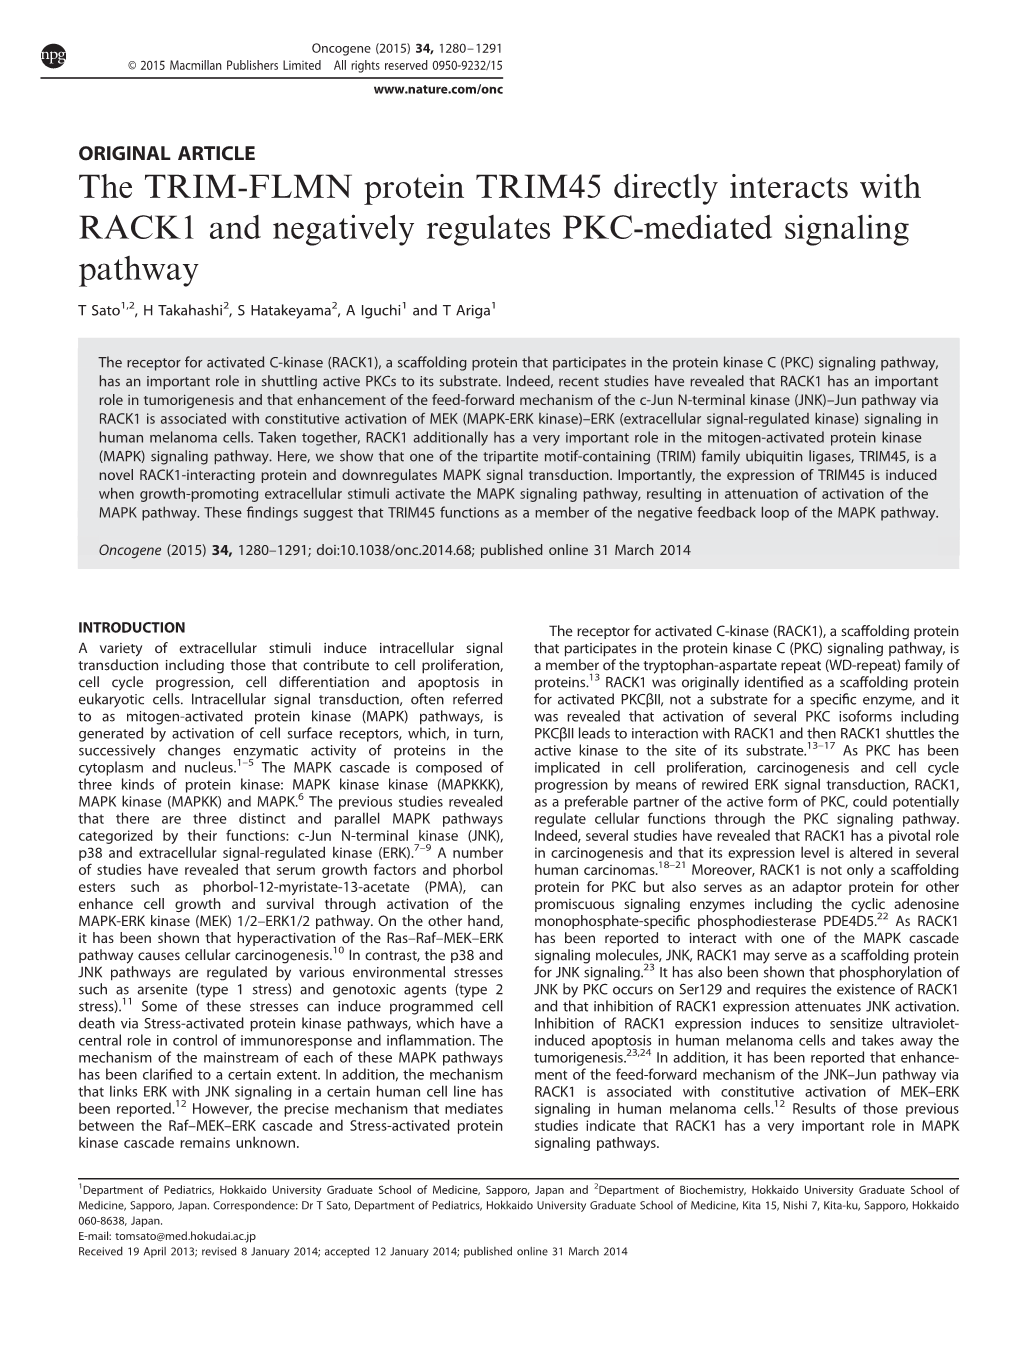 The TRIM-FLMN Protein TRIM45 Directly Interacts with RACK1 and Negatively Regulates PKC-Mediated Signaling Pathway